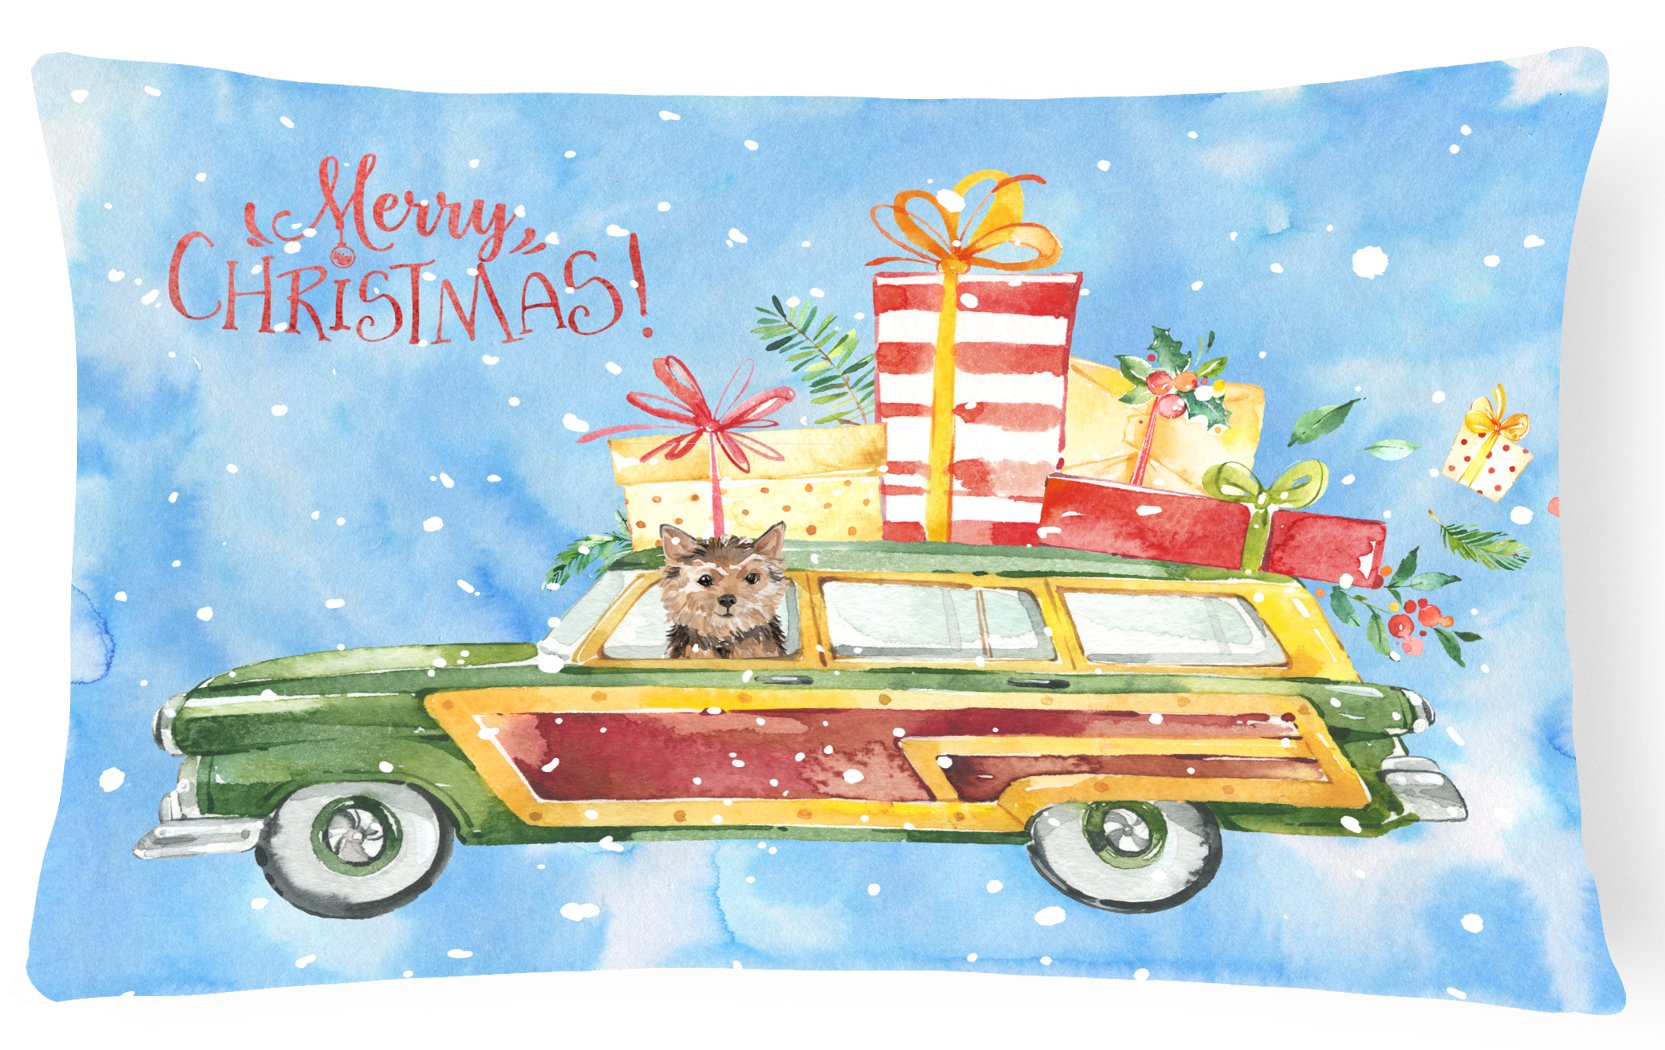 Merry Christmas Norwich Terrier Canvas Fabric Decorative Pillow CK2461PW1216 by Caroline's Treasures